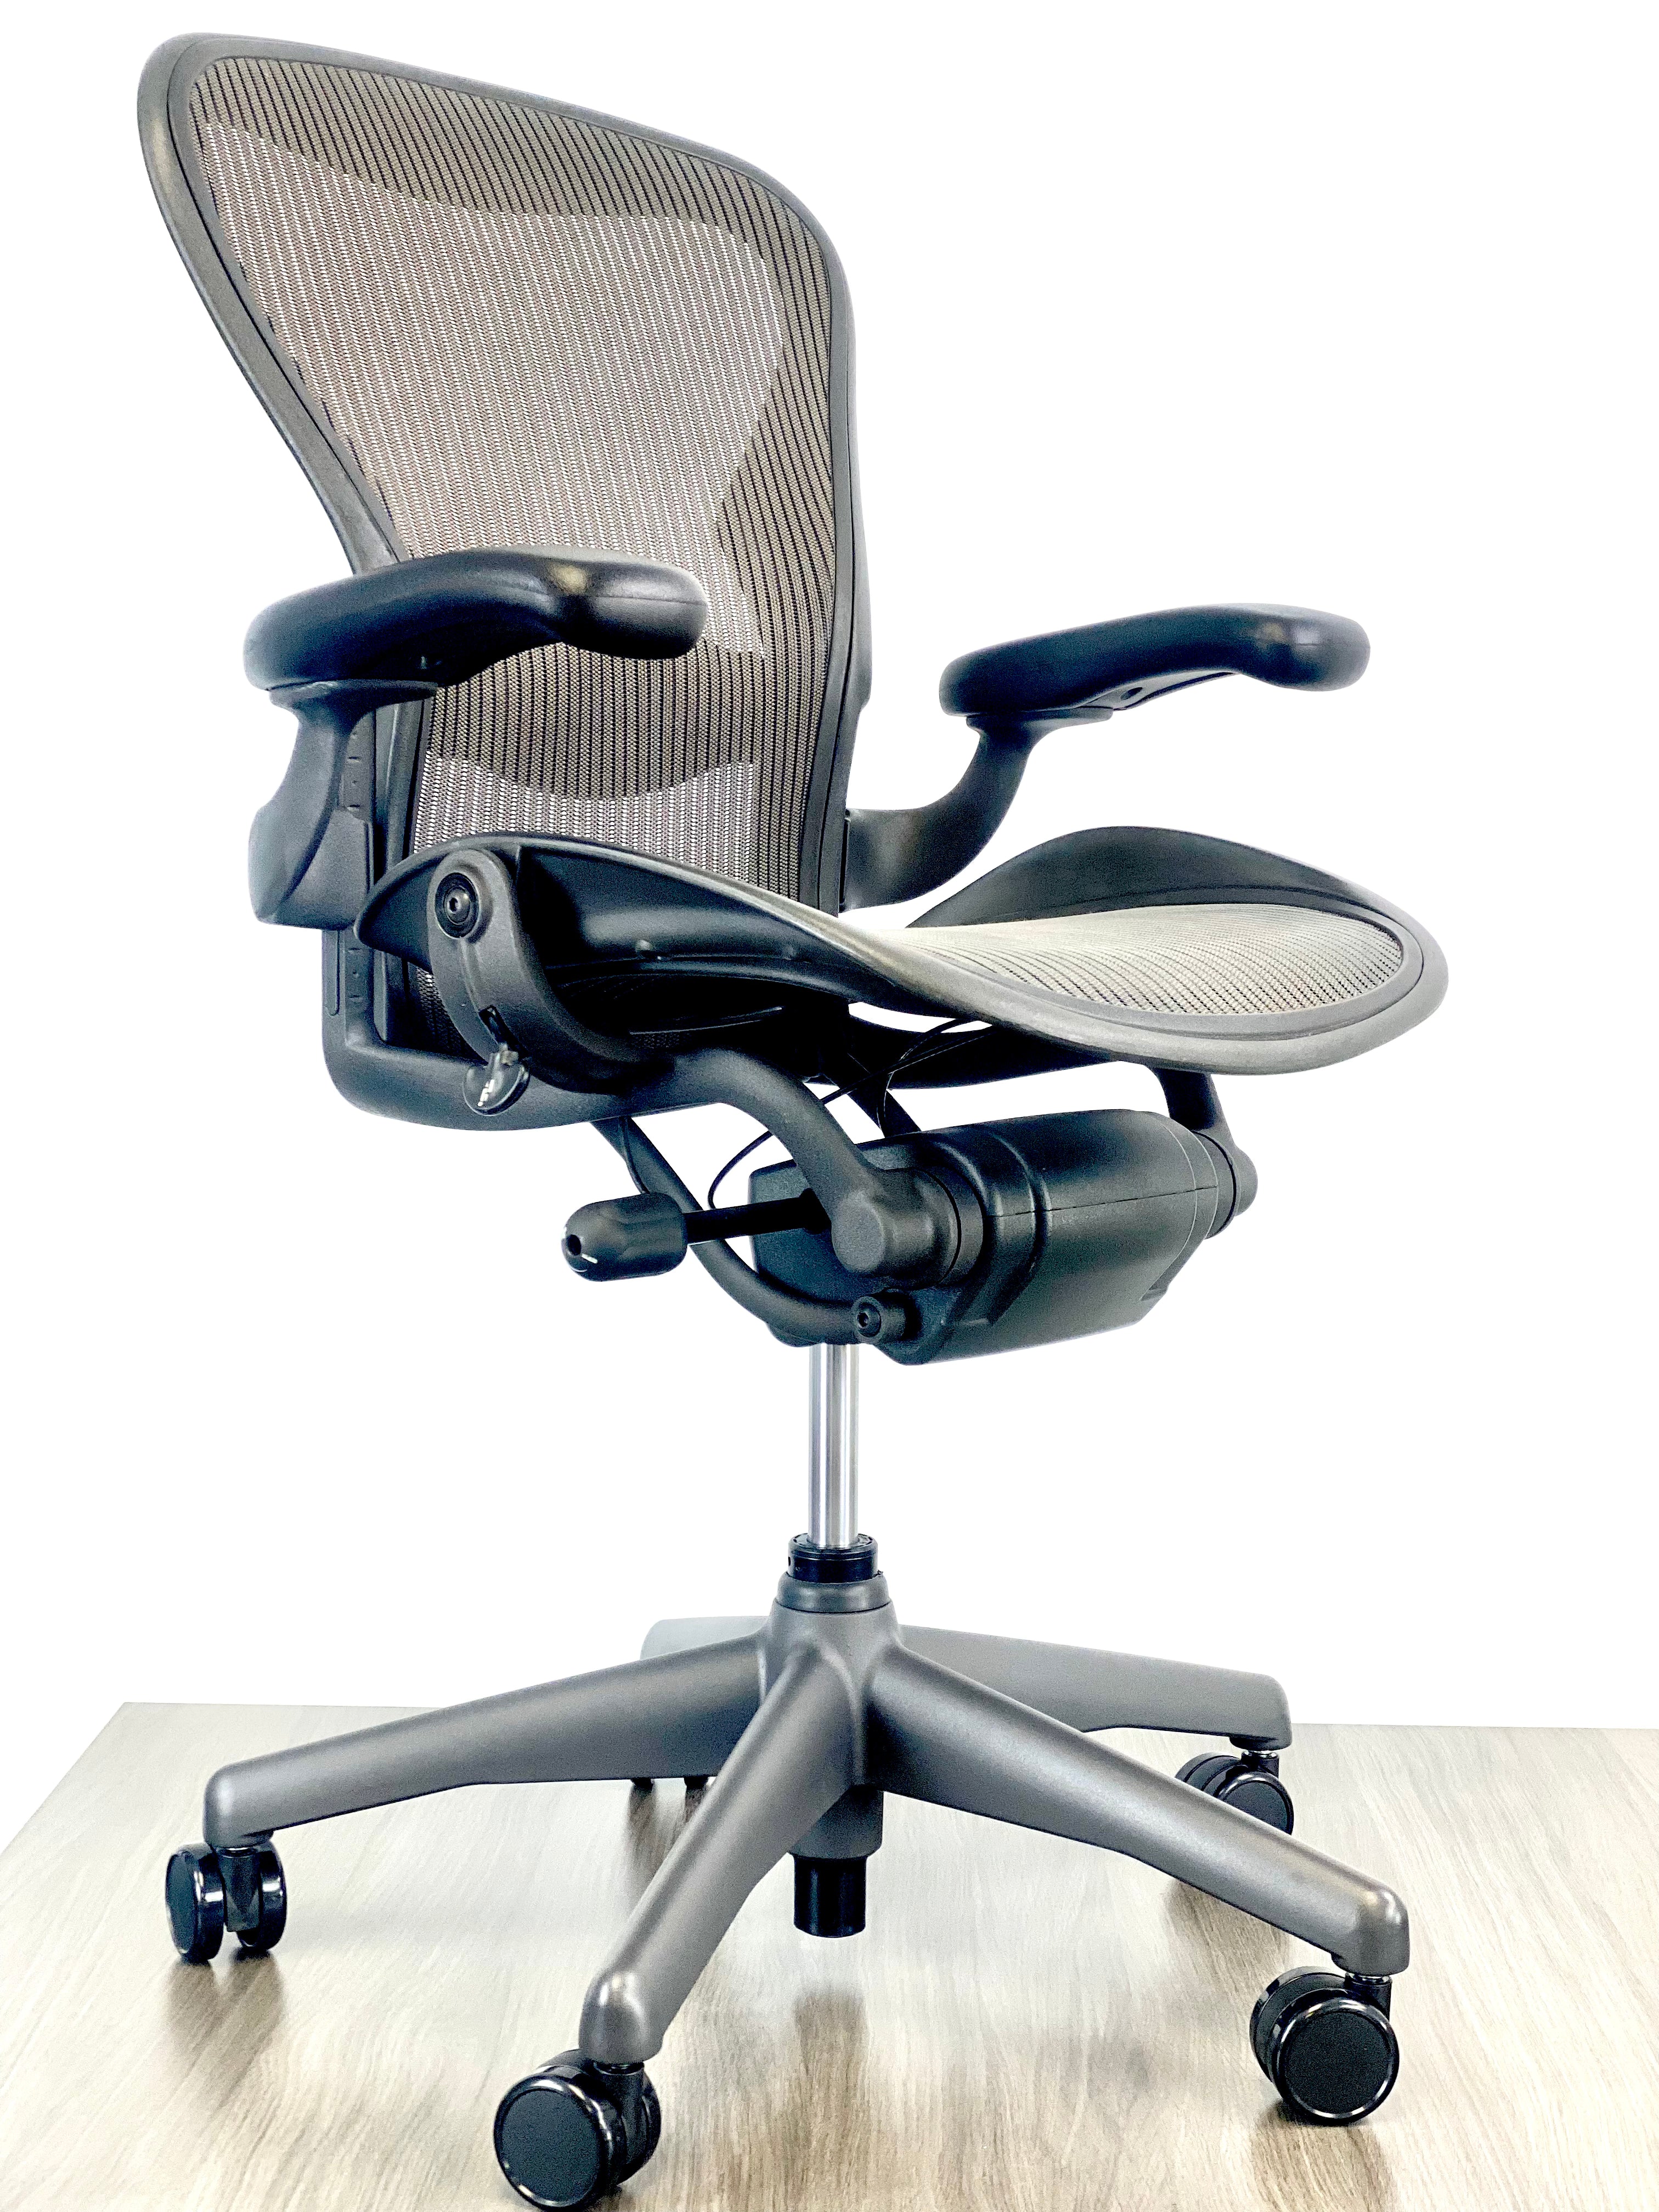 Herman Miller Aeron Chair Open Box Size B Fully Loaded ( Black Chair )